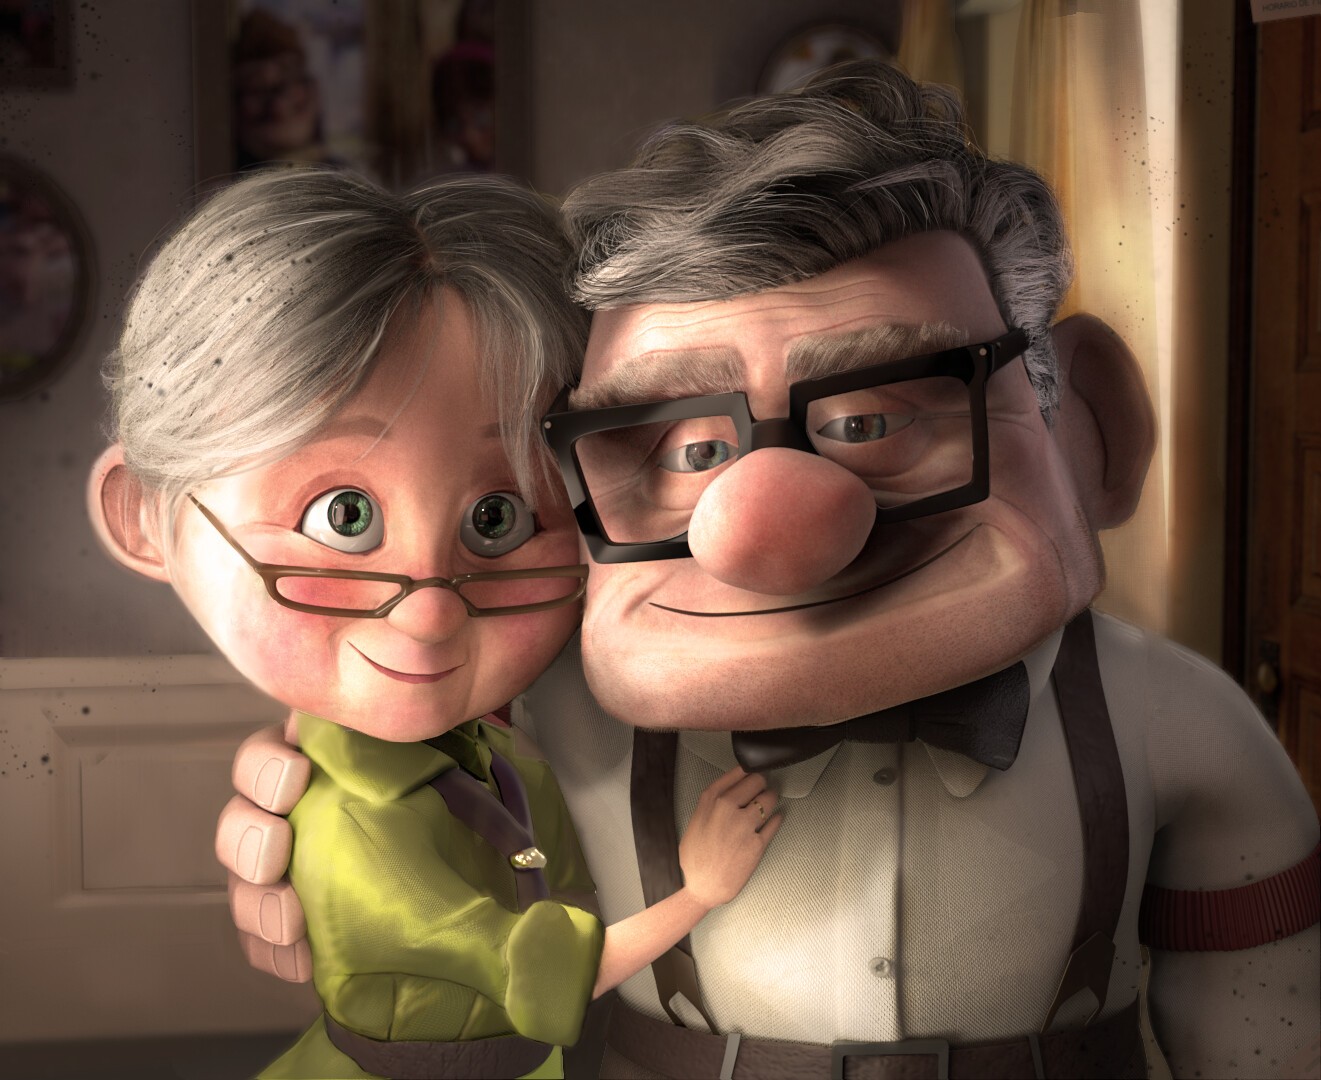 A still from Up (2009) featuring Carl and Ellie | Disney/Pixar